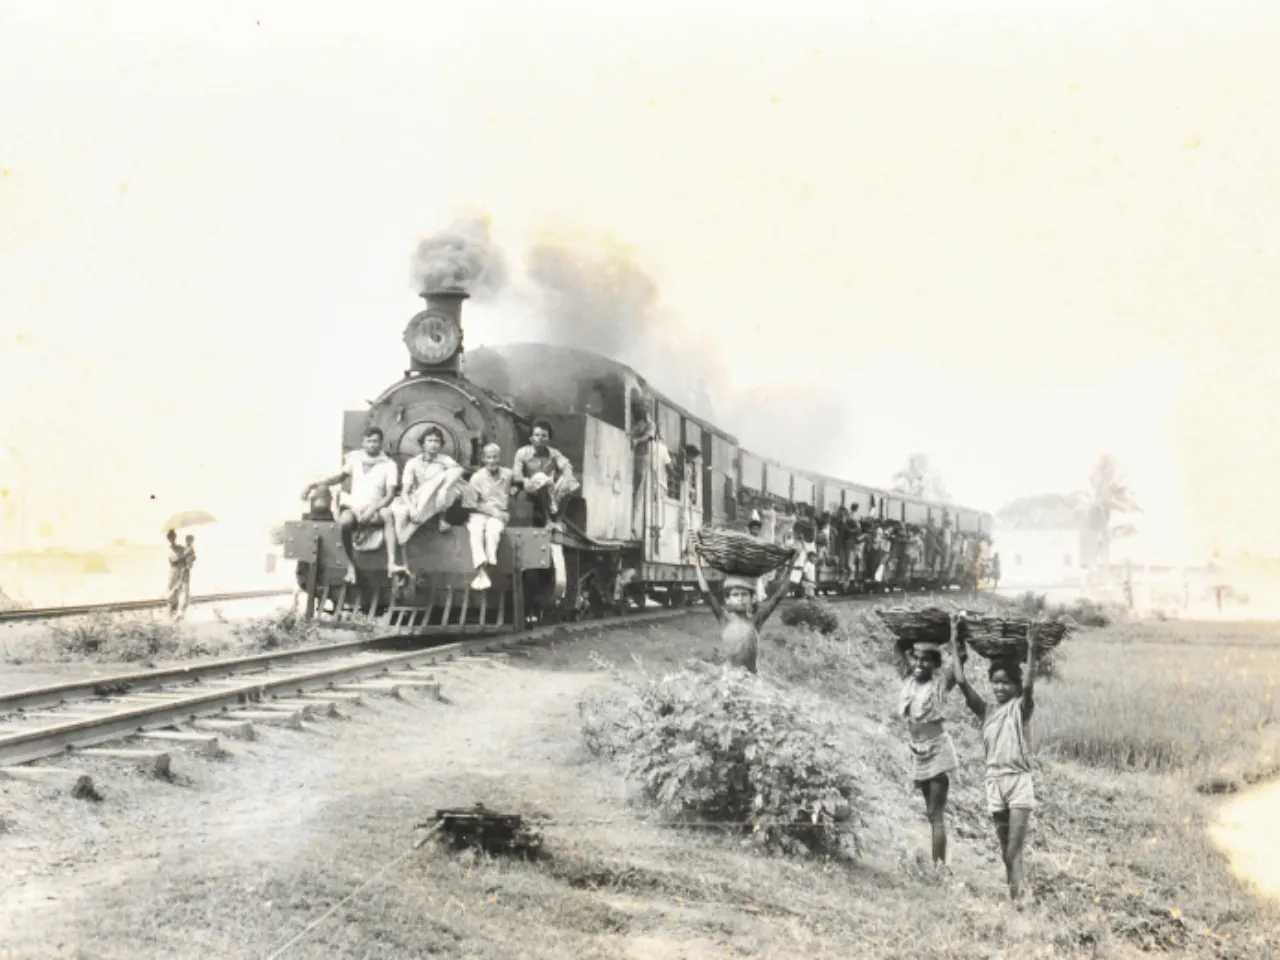 A homage to some of the many ‘FIRSTS’ of the Indian Railways